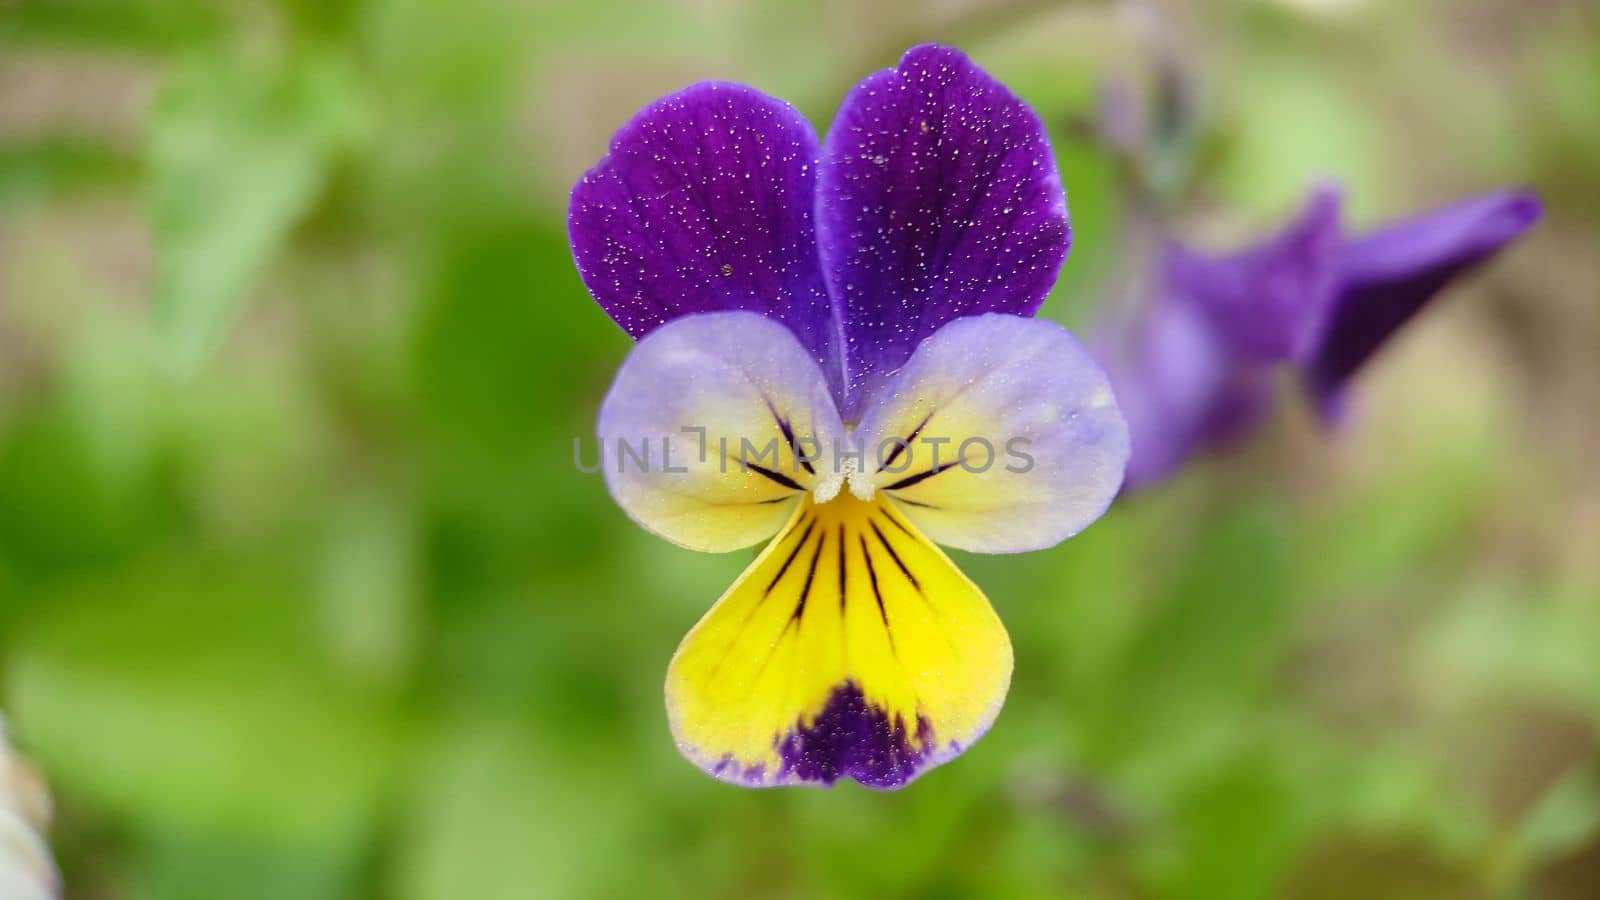 Tricolor violet flower growing in the garden outdoors close-up by Mastak80